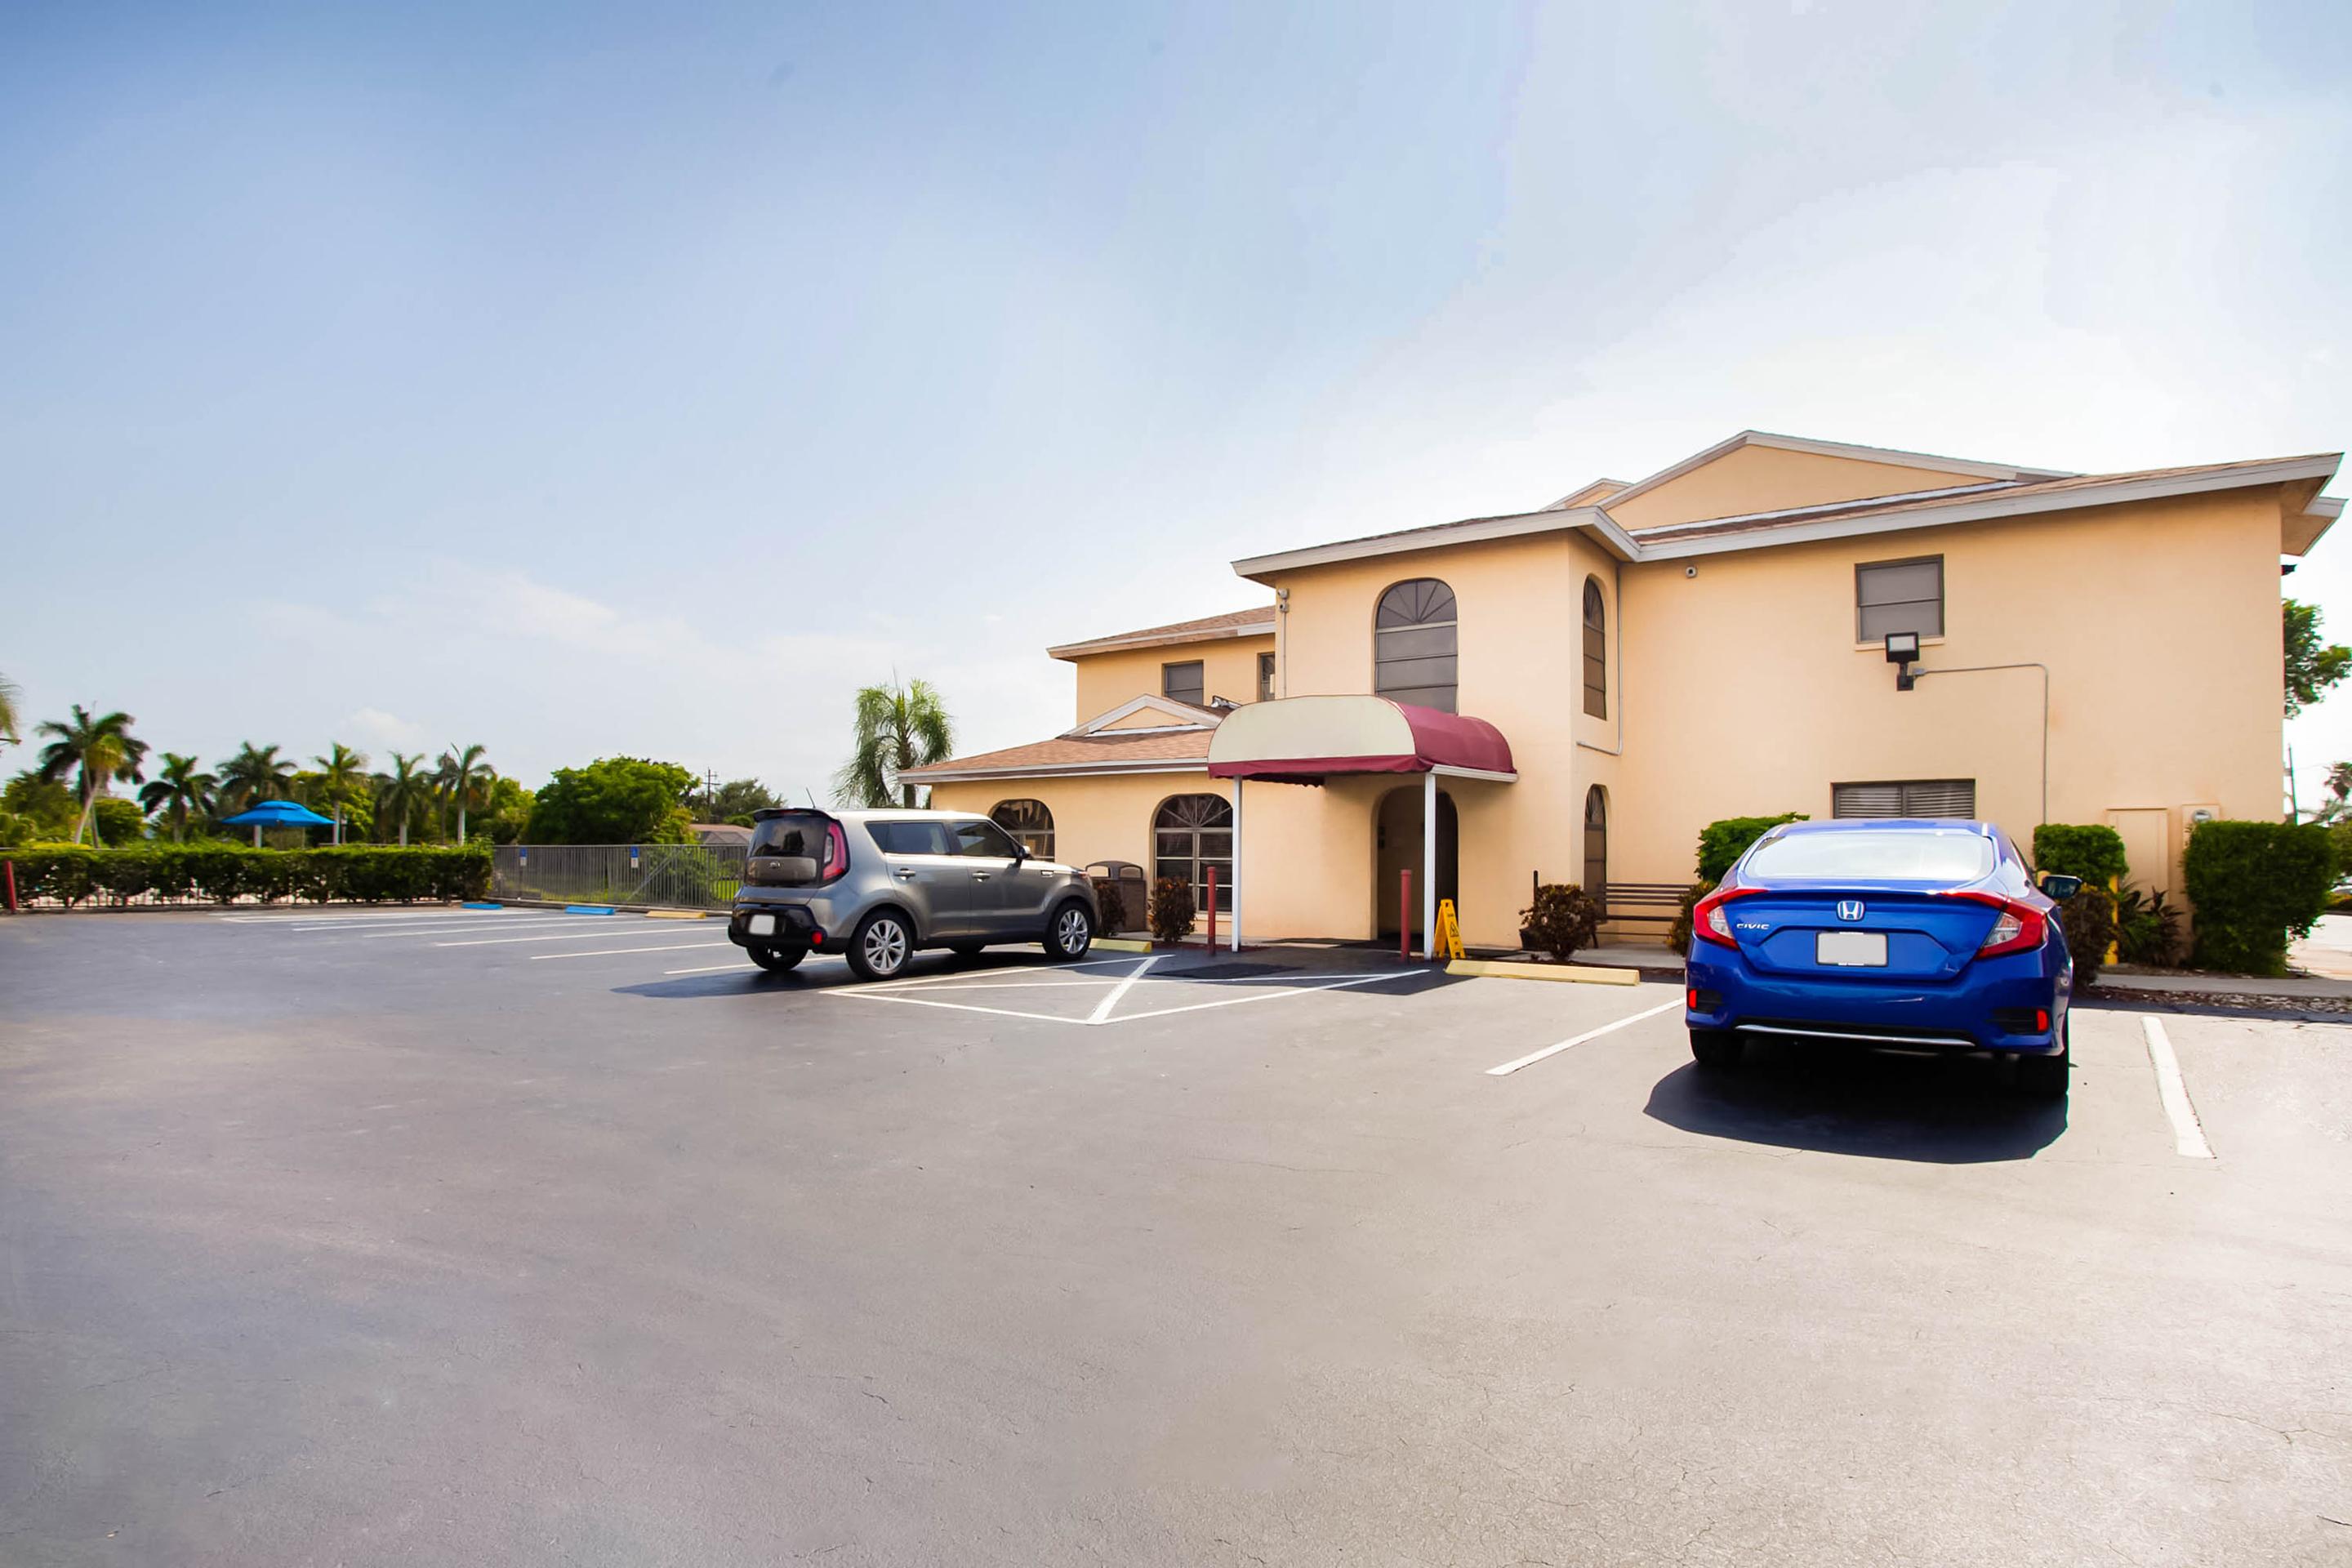 Oyo Waterfront Hotel- Cape Coral Fort Myers, Fl 外观 照片